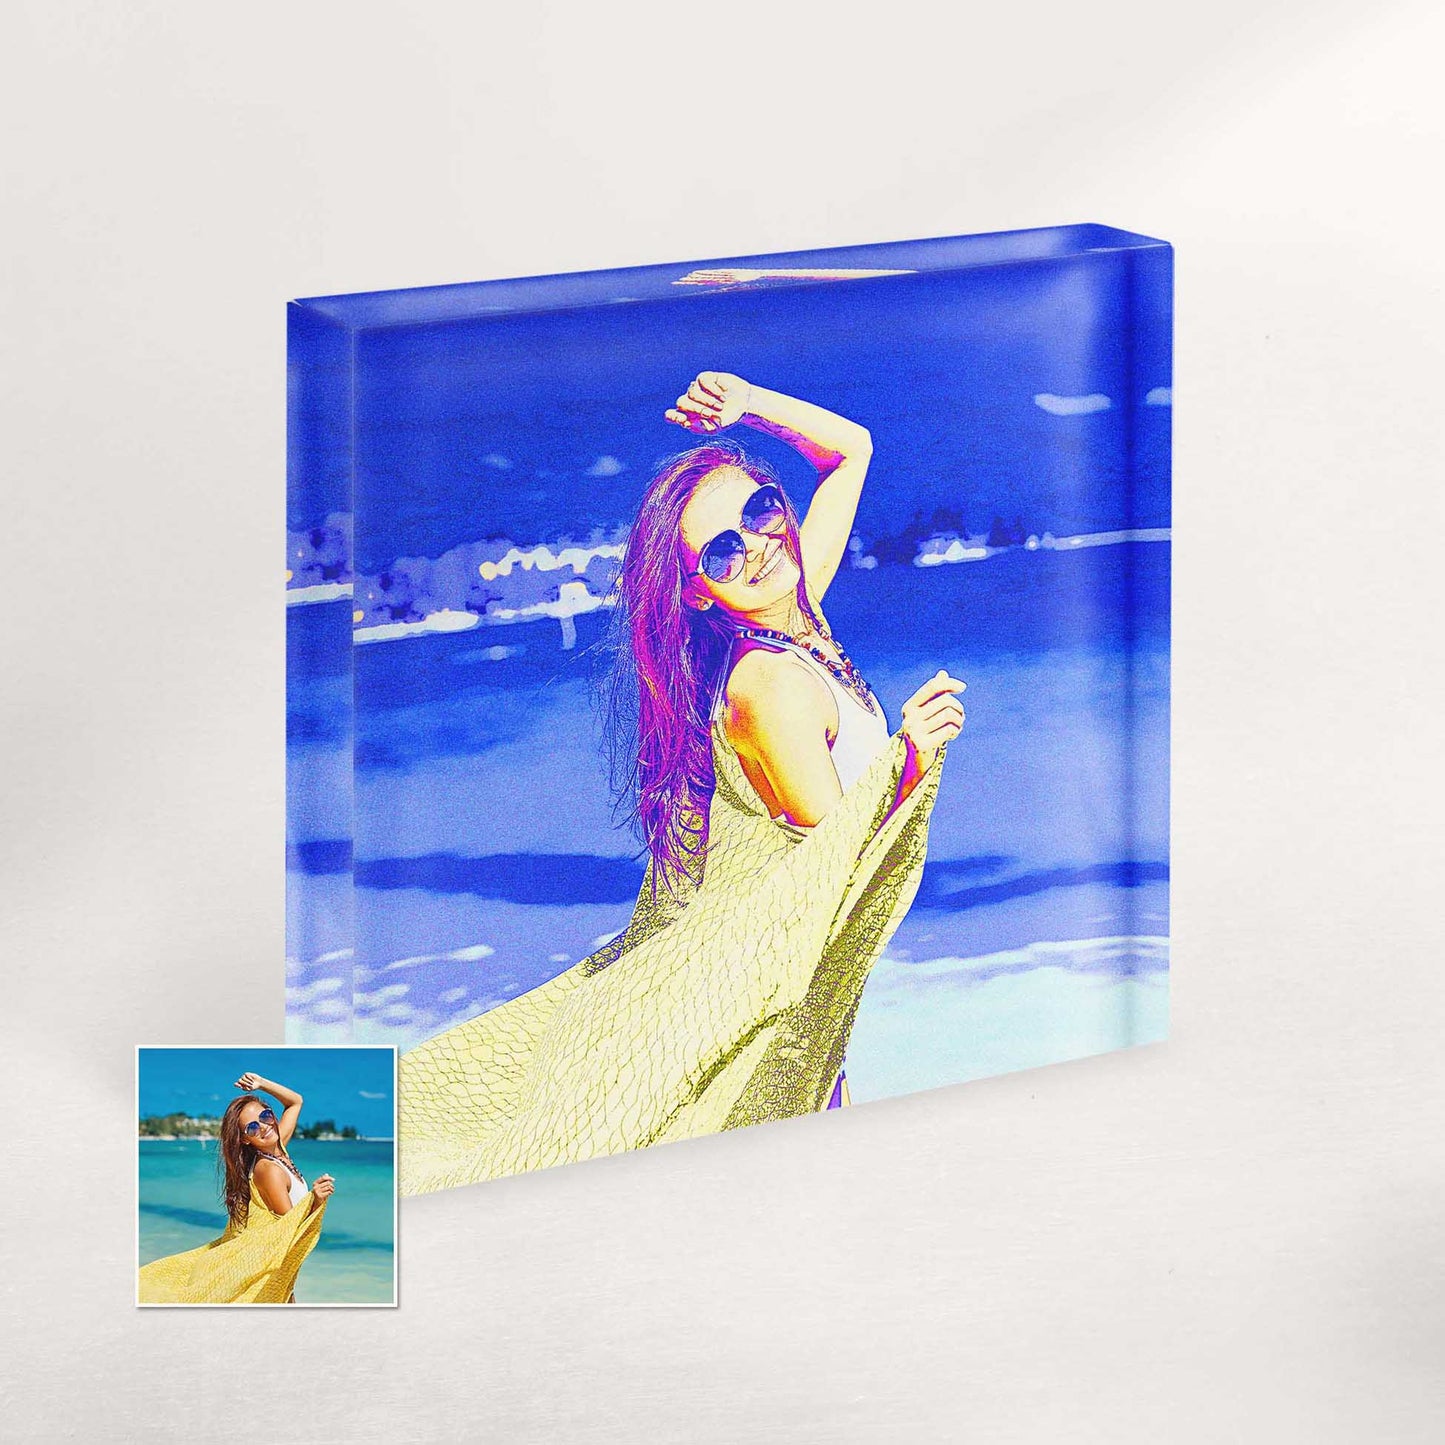 Elevate your home decor with this personalised Blue and Purple Posterizer Acrylic Block Photo. The original design and vibrant color scheme make it a standout piece, adding a touch of artistic flair to your space